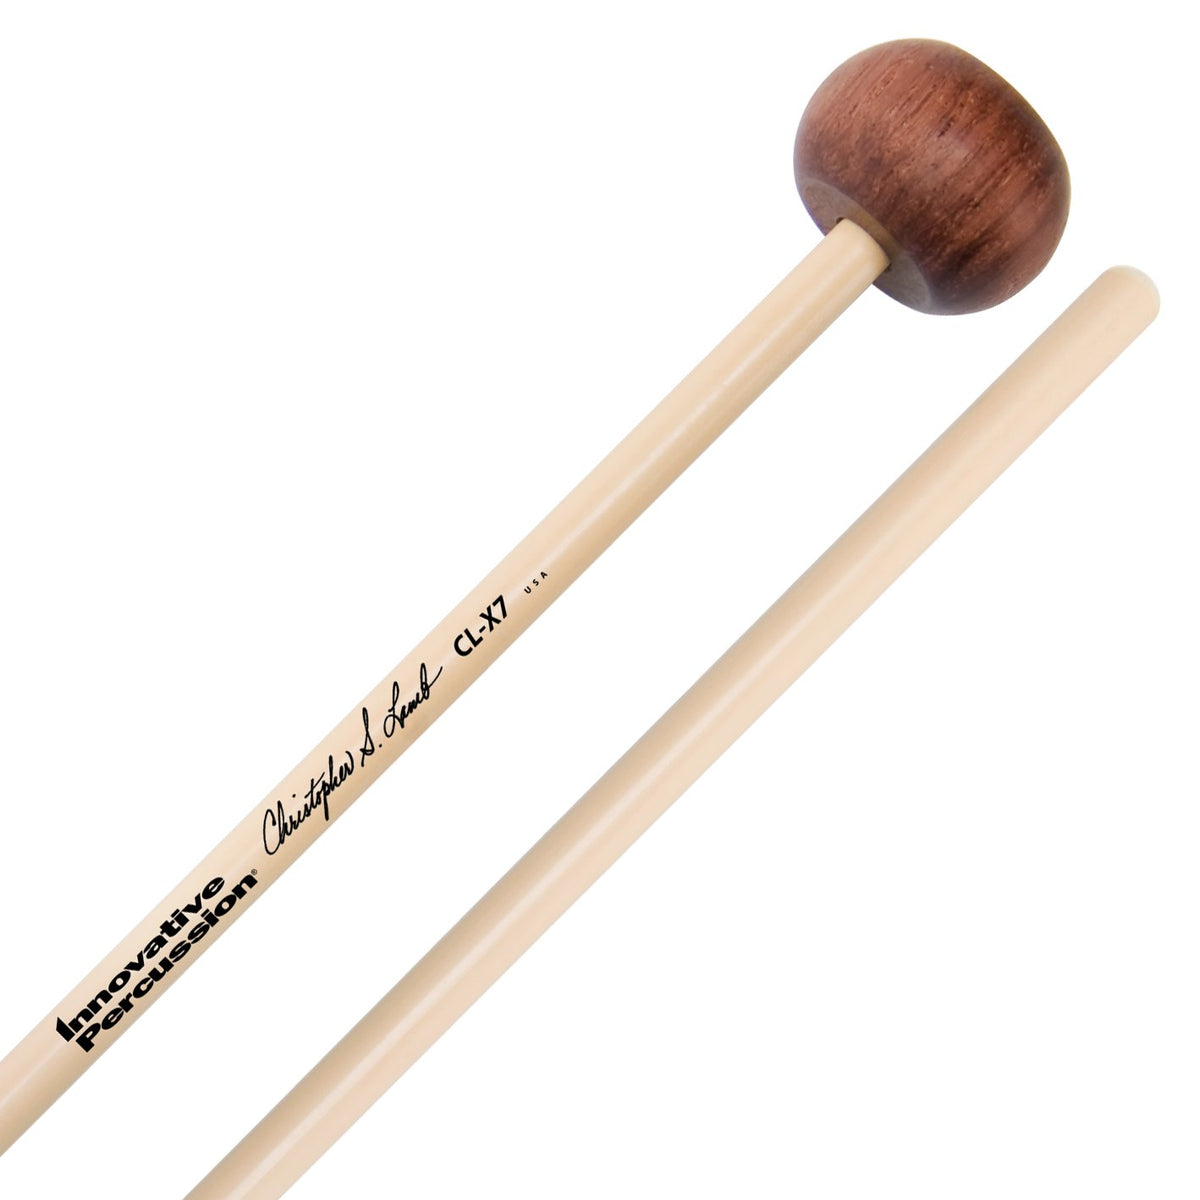 Innovative Percussion - Christopher Lamb Orchestral Series Concert Xylophone Mallets-Percussion-Innovative Percussion-CL-X7: Medium/Wood Disk-Music Elements